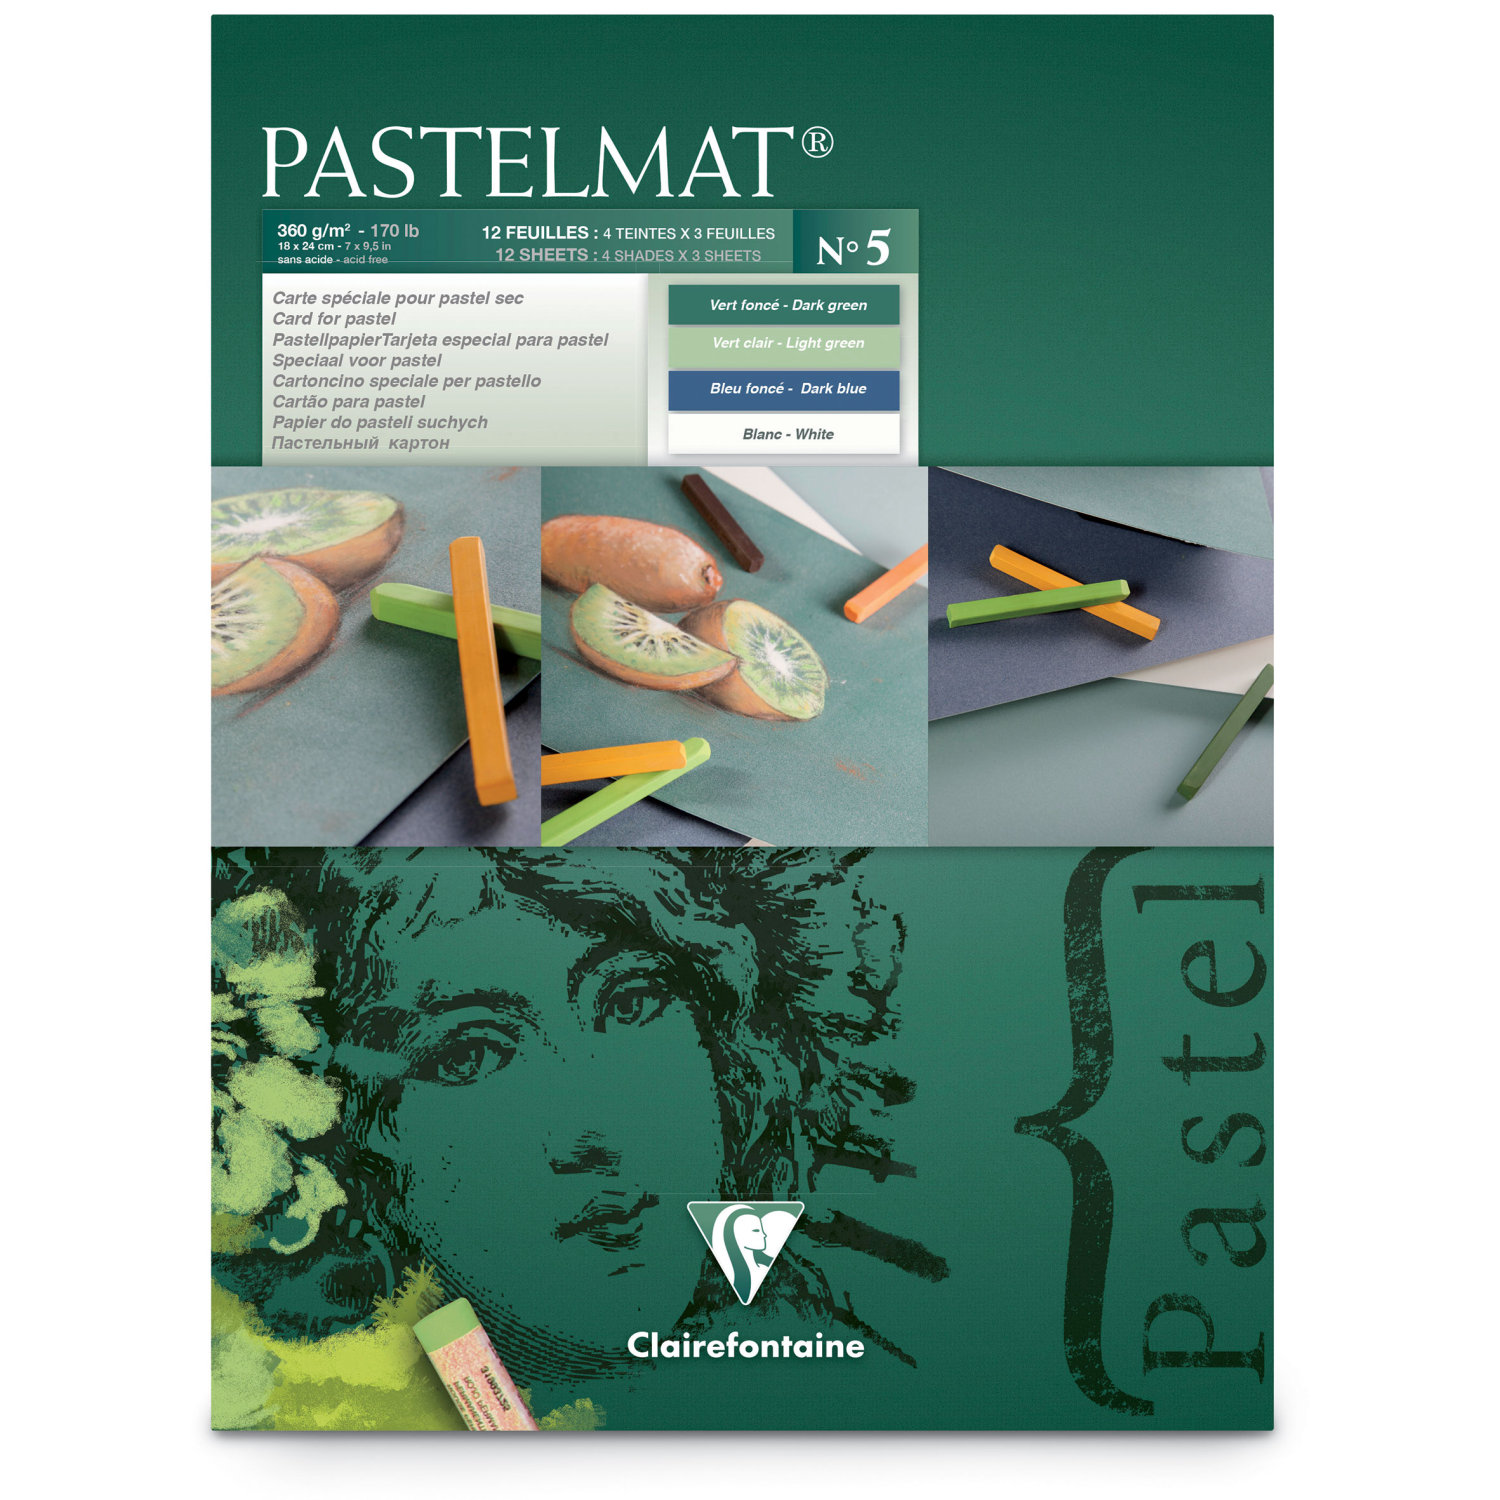 Clairefontaine Pastelmat Green Shades No.5 - 12 sheets 18 x 24cm